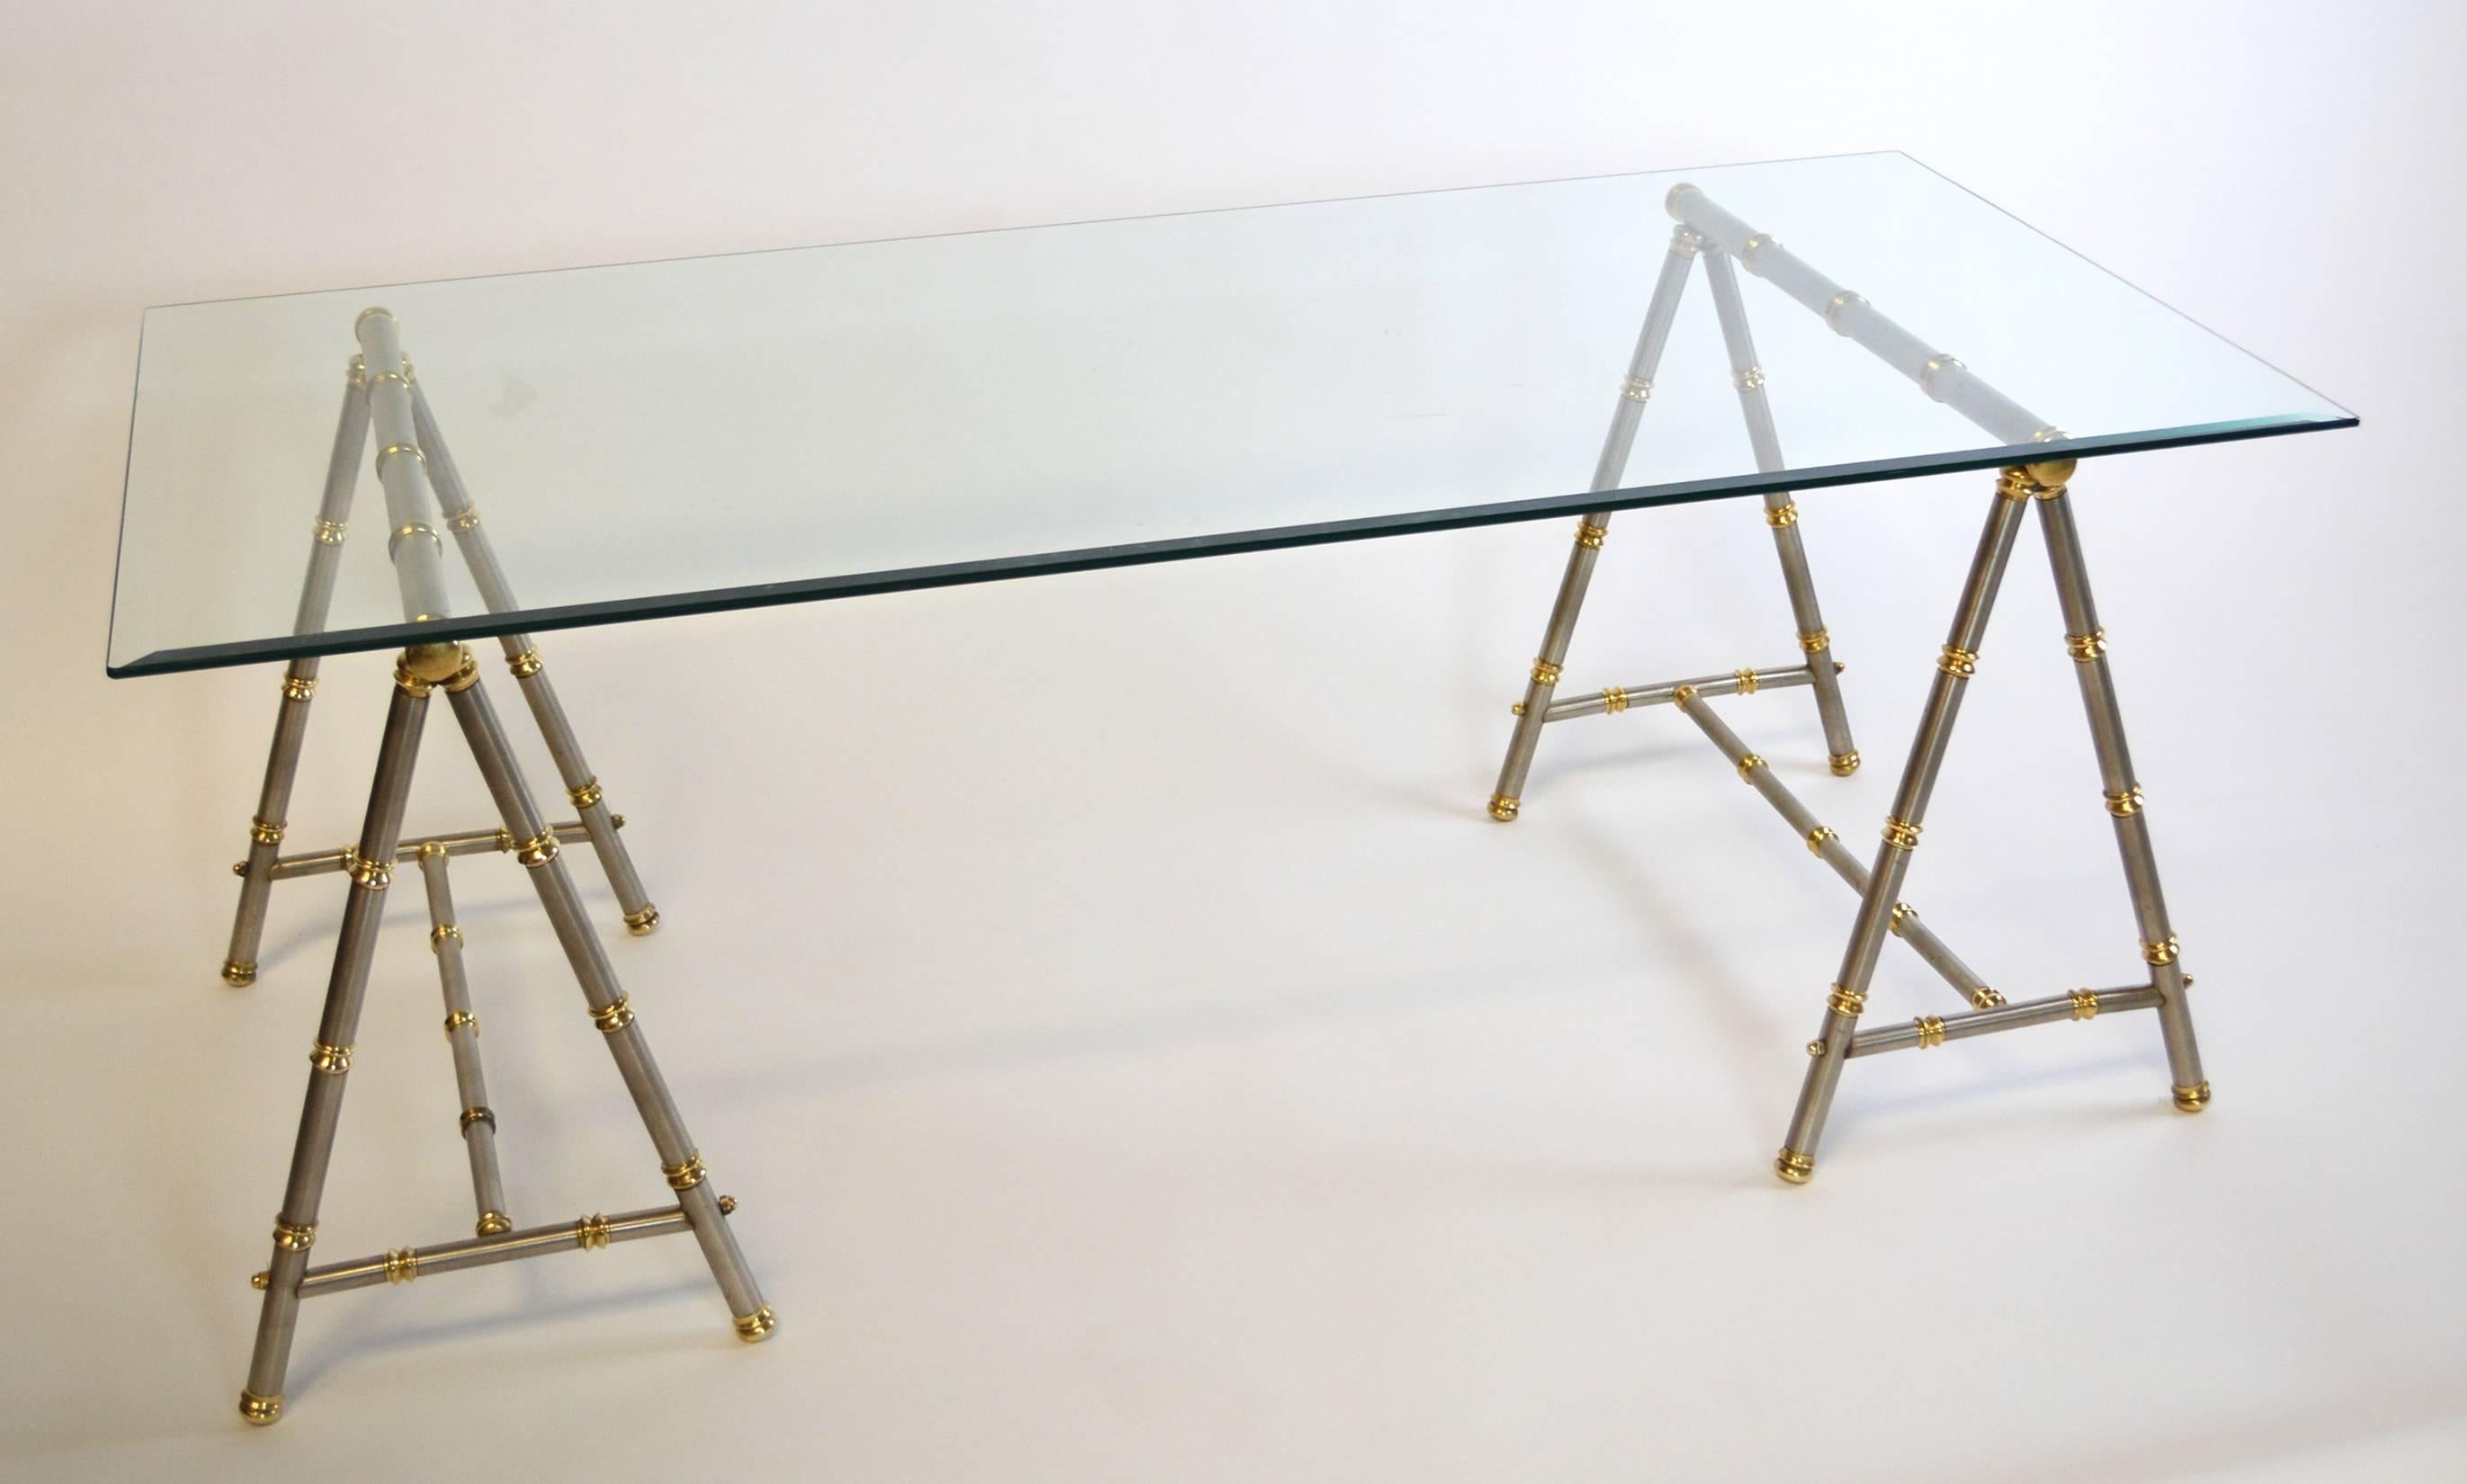 A chic pair of steel trestle or sawhorse form coffee table bases with brass accents. Stylized faux bamboo after Maison Jansen and Maison Charles, stamped 